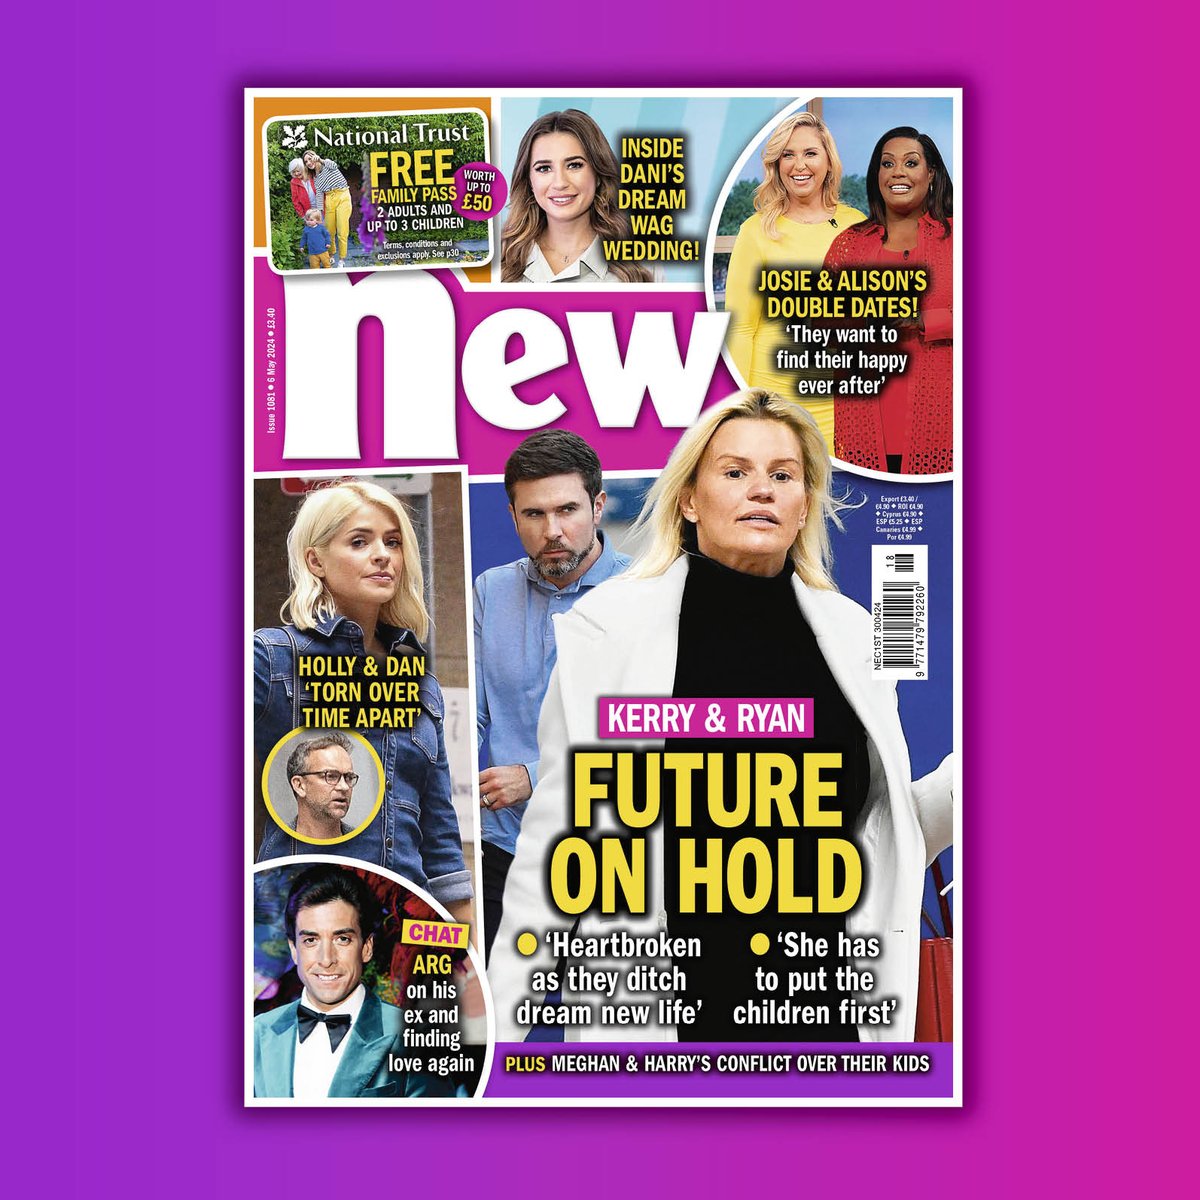 NEW ISSUE ALERT! In this week’s issue we’ve got Kerry Katona’s future on hold. Plus, we’ve got Meghan and Harry’s conflict over their kids. Out now!